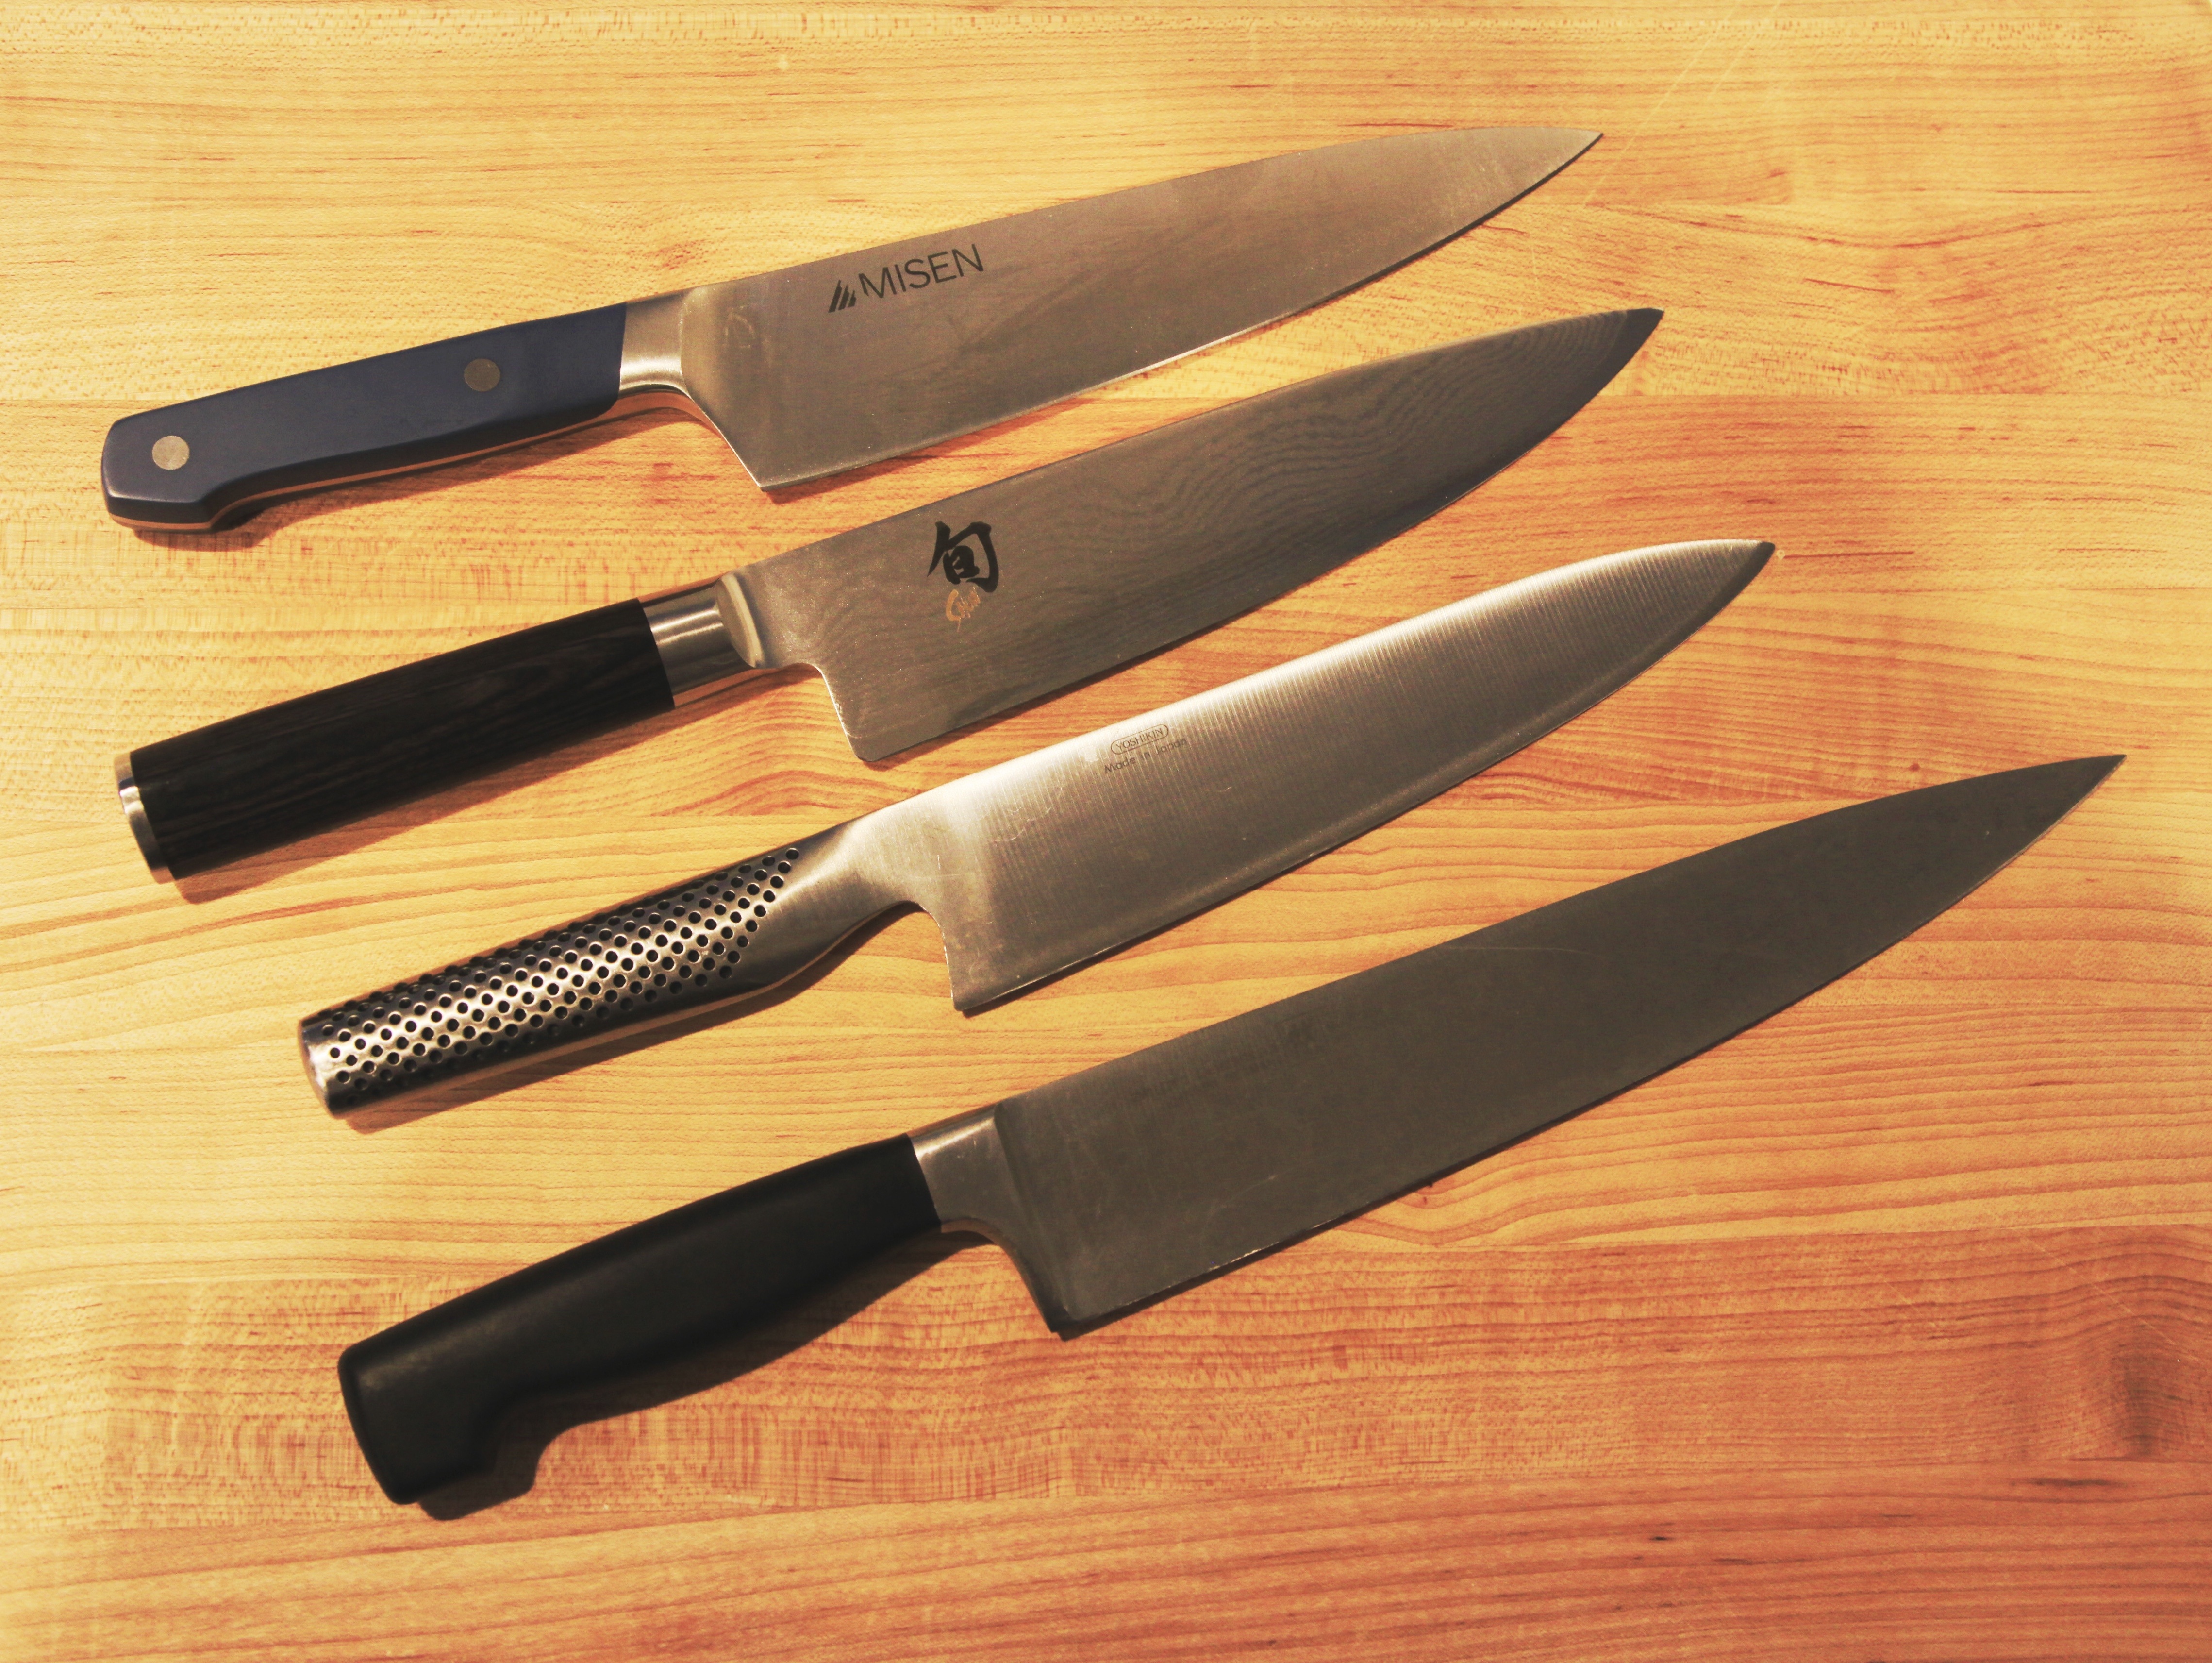 Made In vs. Misen: Which Knives Are Better? (10 Differences) 